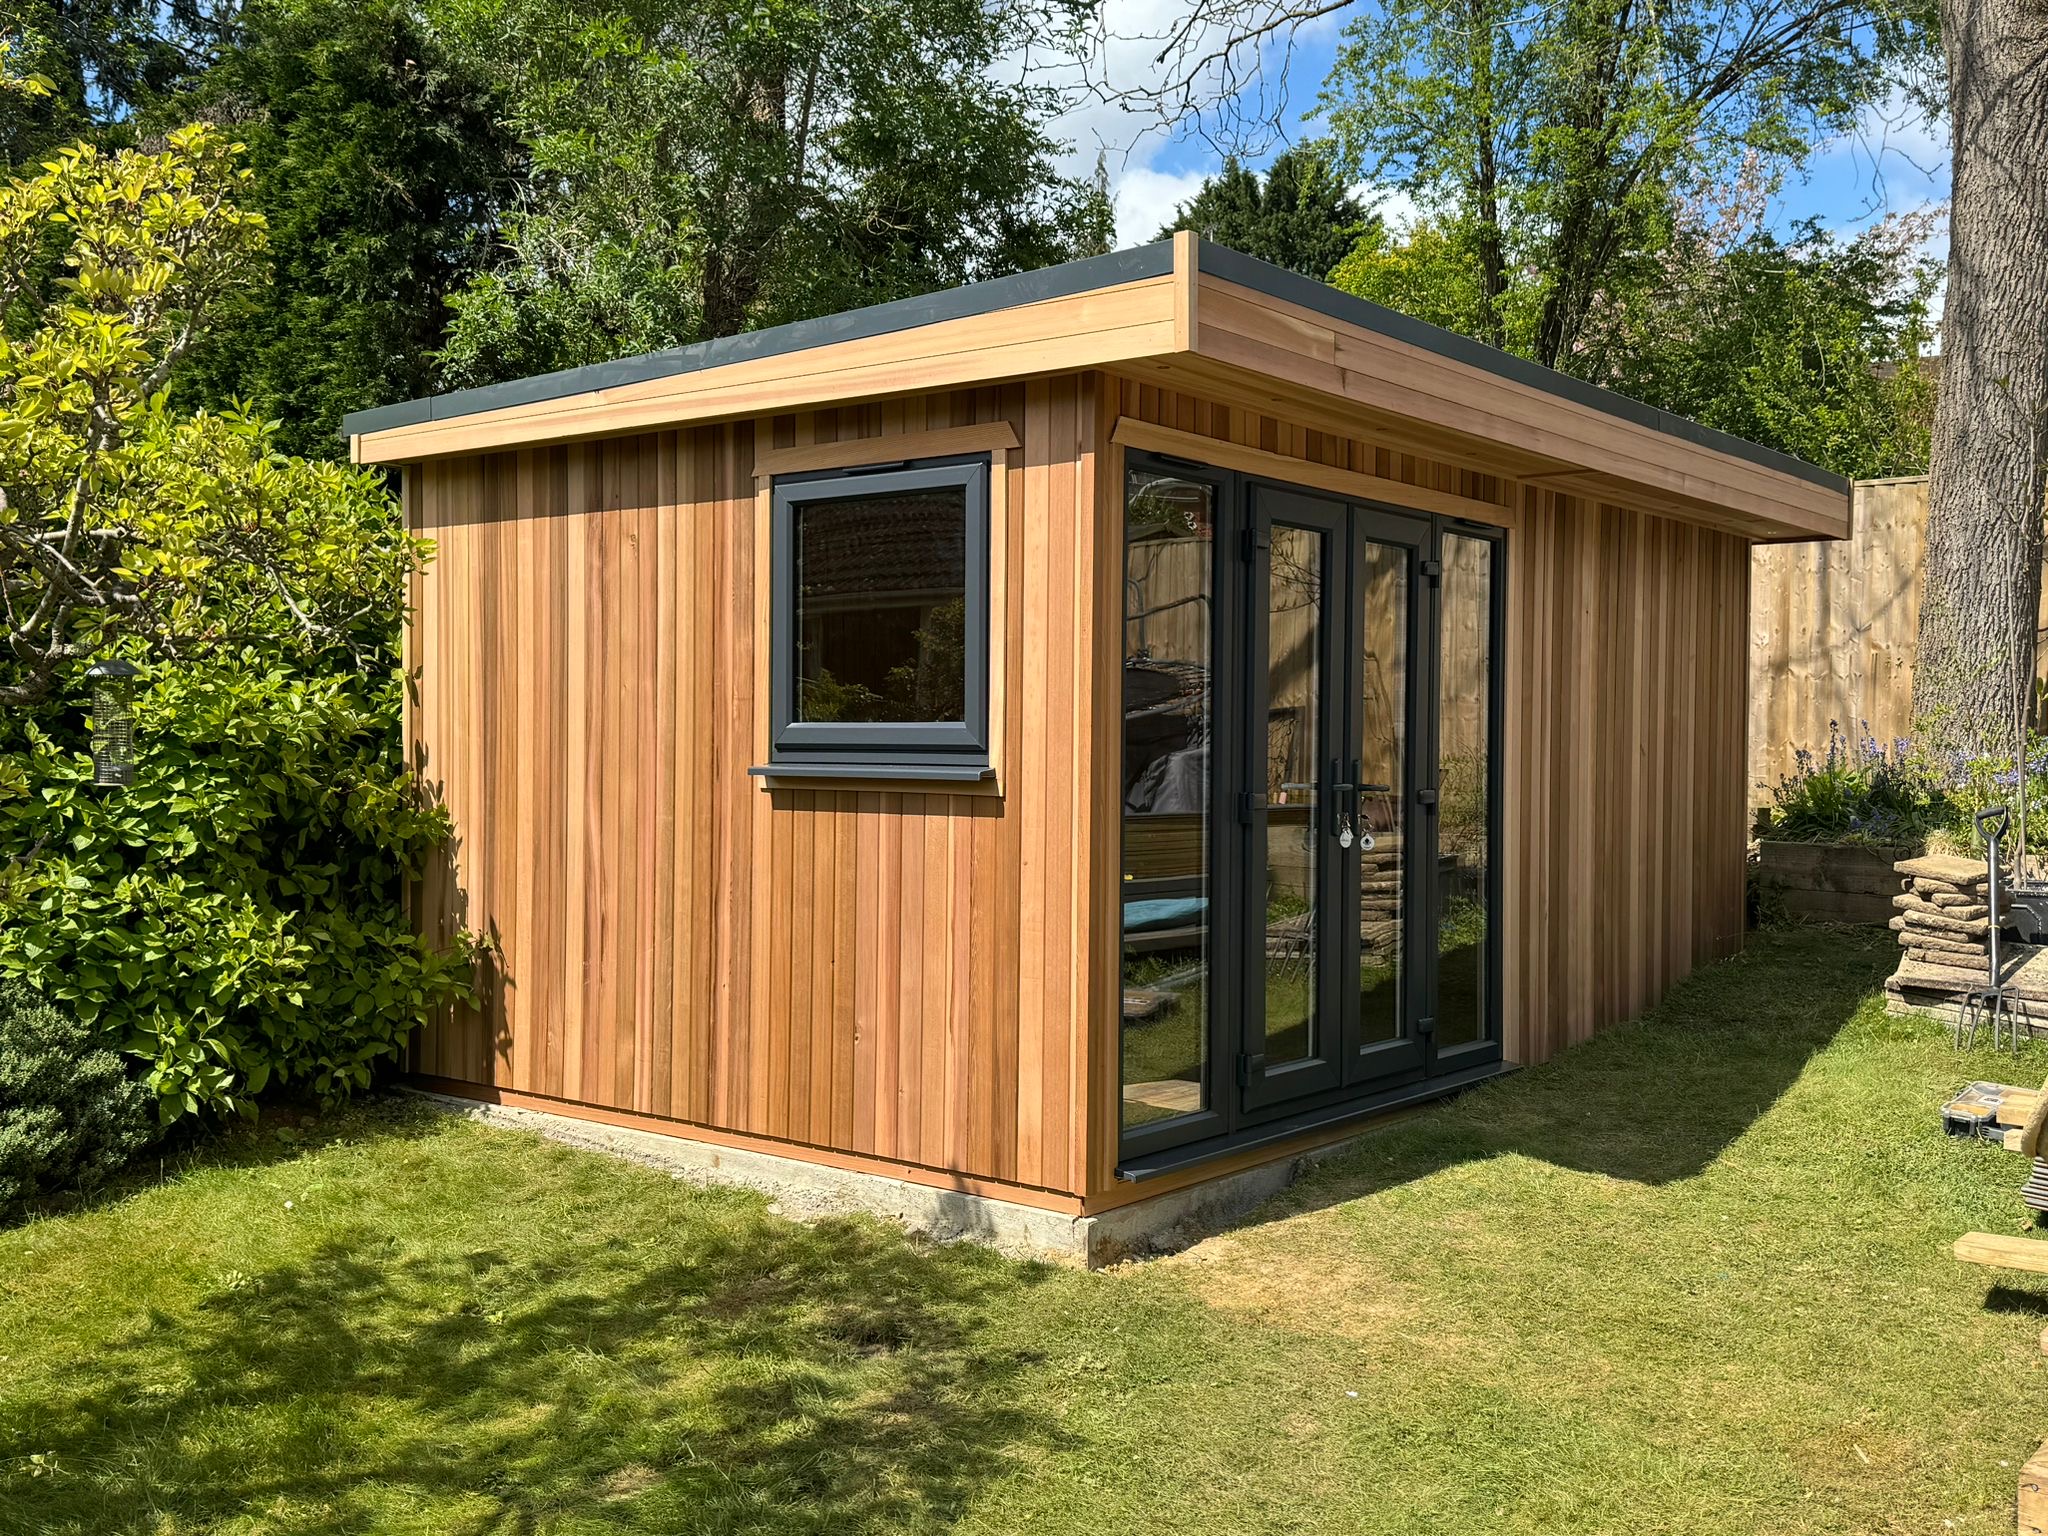 How Much Does a Garden Office Cost?